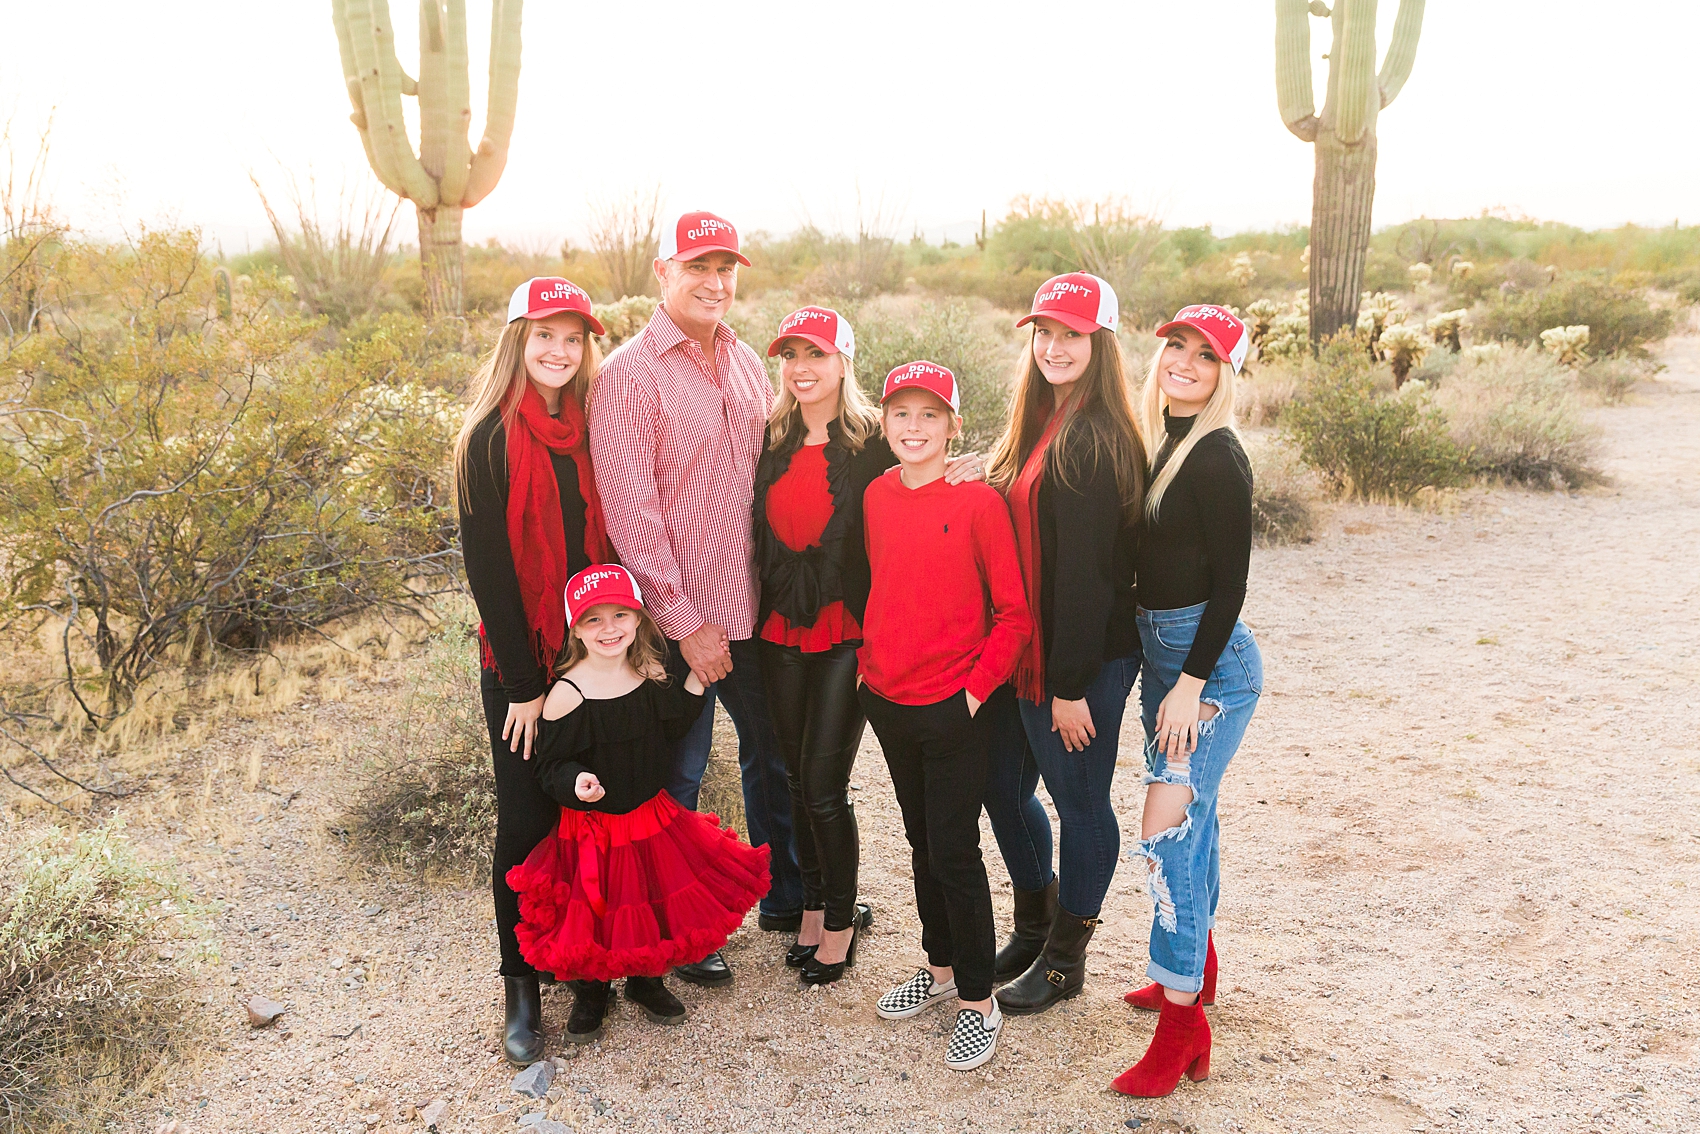 Leah Hope Photography | Scottsdale Phoenix Arizona | Desert Landscape Cactus Scenery | Sunset Golden Hour Family Photos | Family Pictures | Christmas Outfits | Family Poses